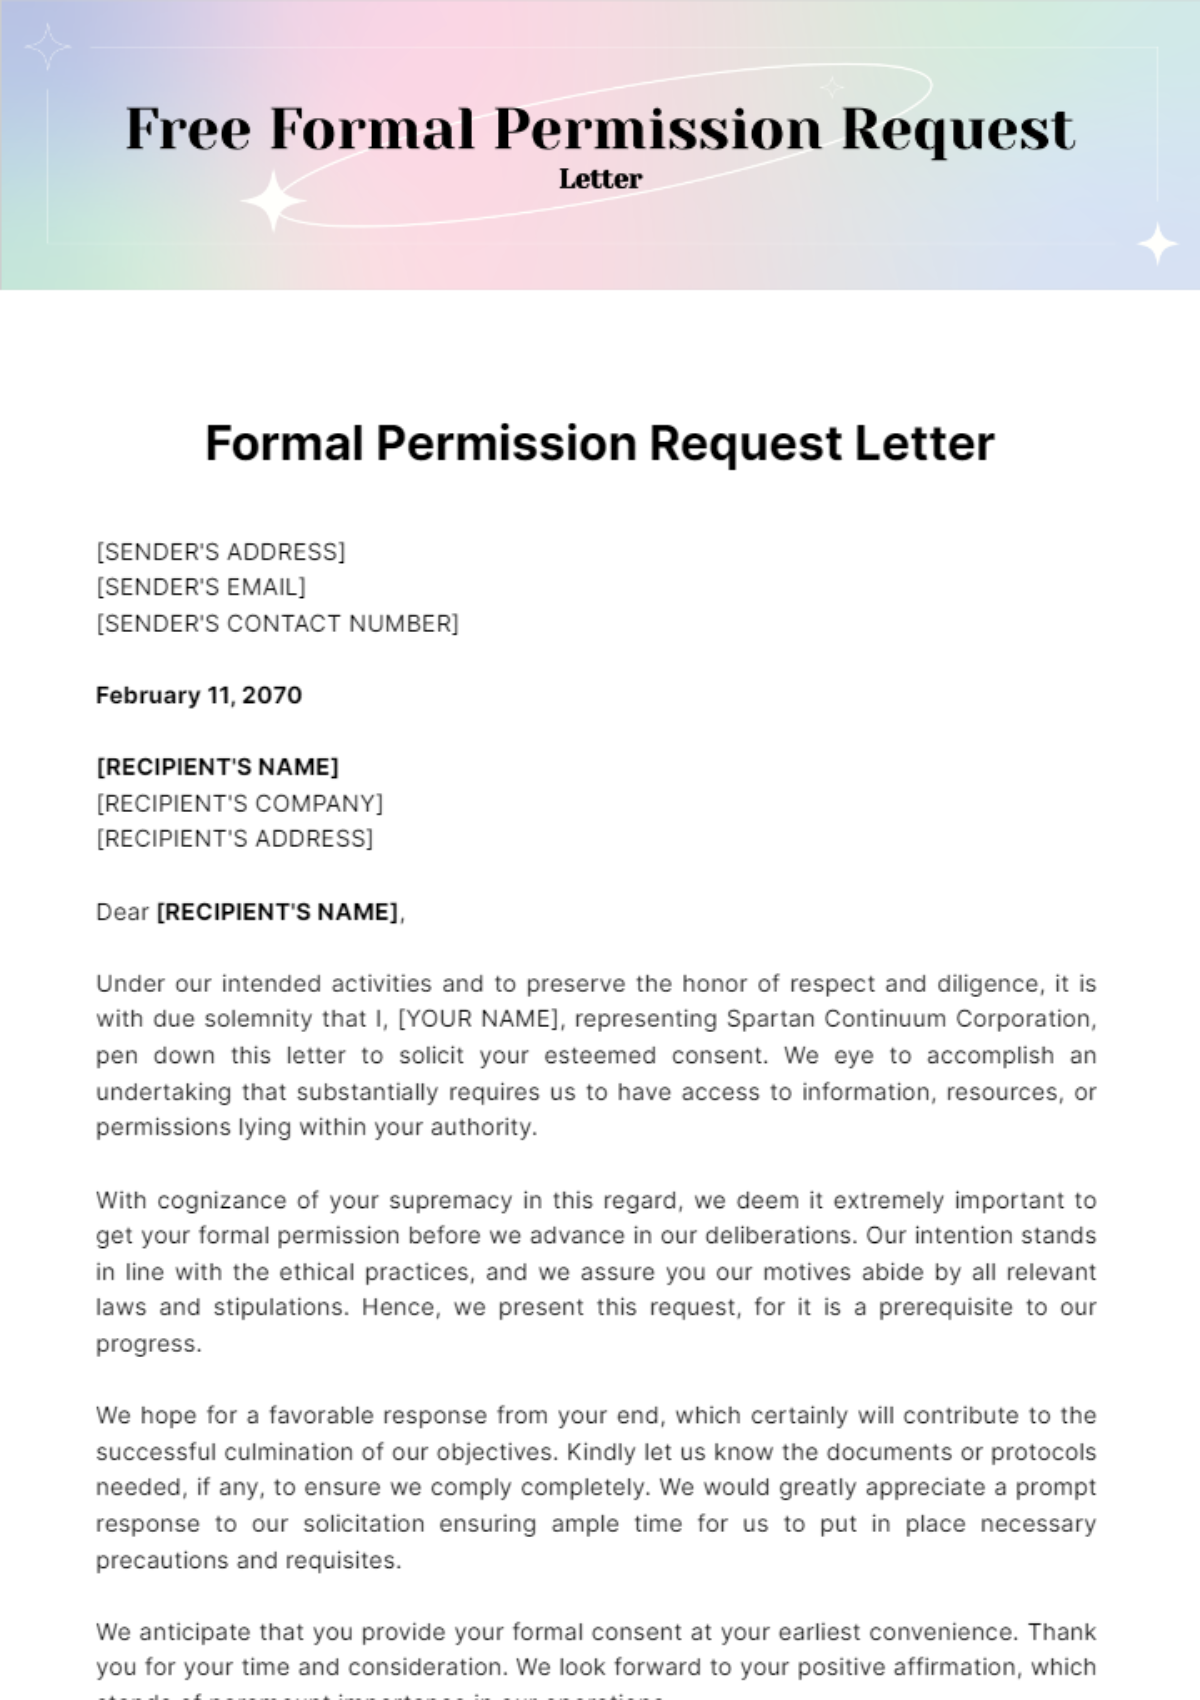 Free Formal Permission Request Letter Template